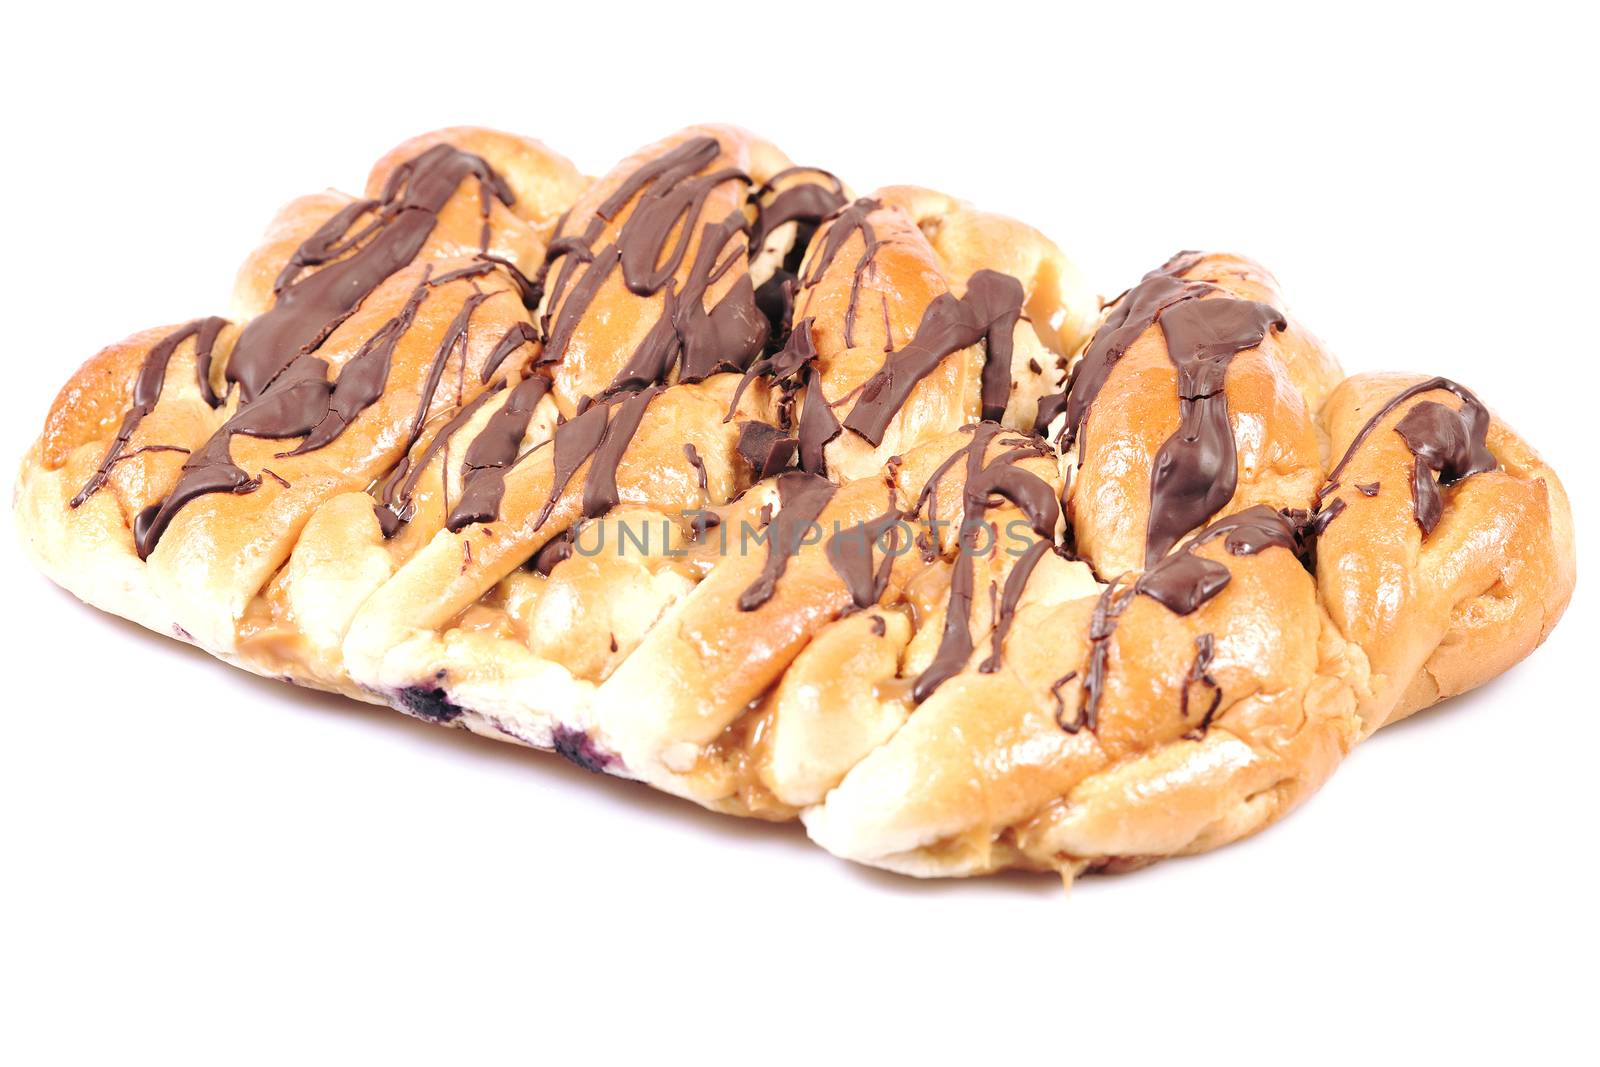 Chocolate and caramel danish pastry on a white background